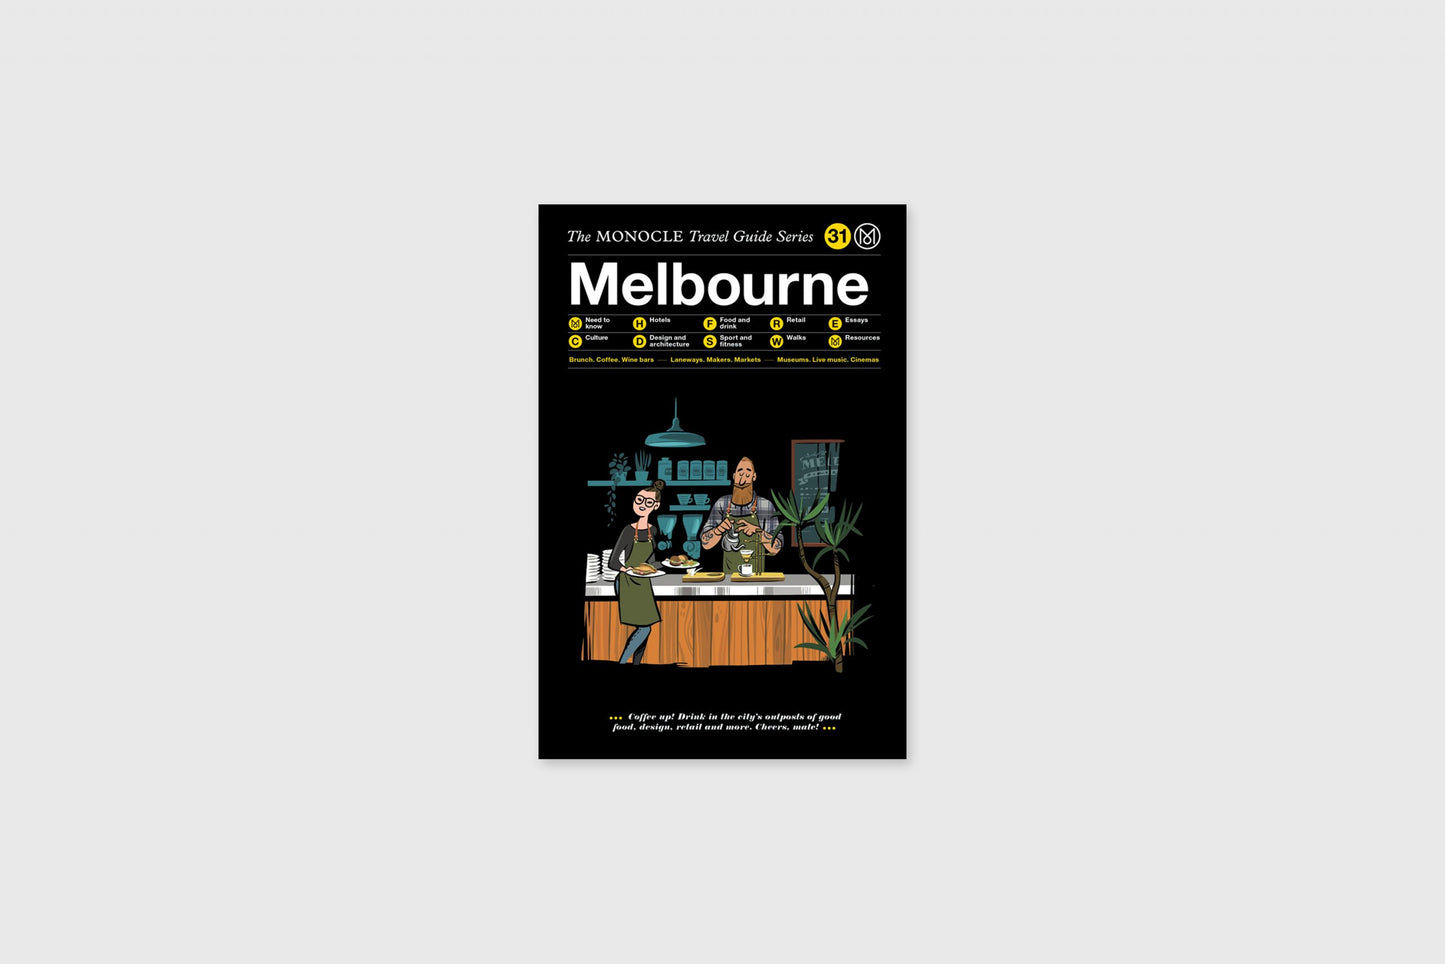 Melbourne: The Monocle Travel Guide Series